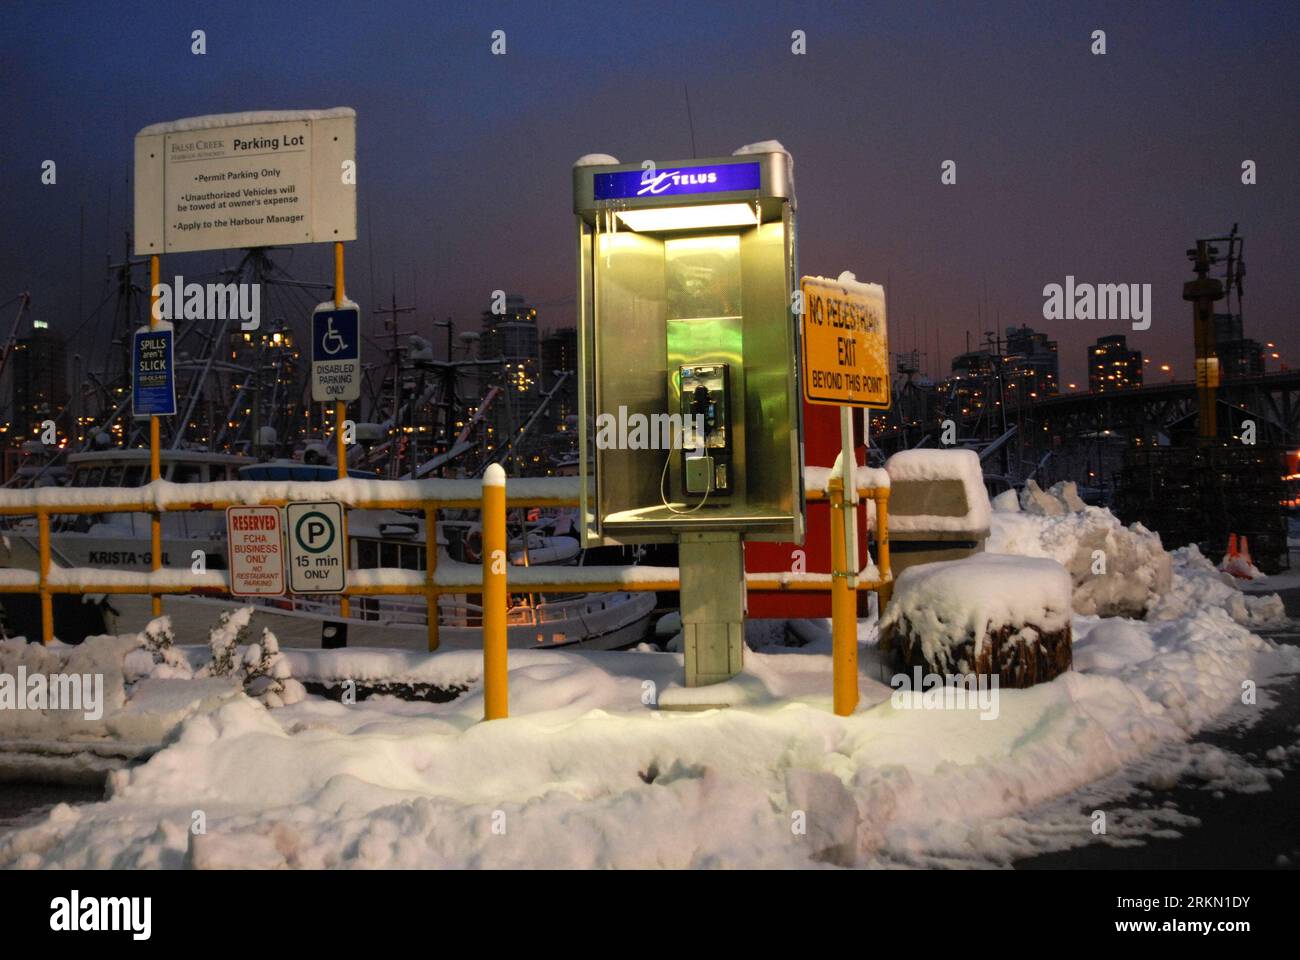 Bildnummer: 56905041  Datum: 17.01.2012  Copyright: imago/Xinhua (120118) -- VANCOUVER, Jan. 18, 2011 (Xinhua) -- Telephone booth is surrounded by snow at Vancouver s Granville Island marina, Jan. 17, 2012. Environment Canada has issued a snowfall warning for Metro Vancouver, with estimated 20cm of fresh snow to fall on Vancouver overnight. Wind chill caused by a blast of continental arctic air could cause the temperature to drop to -20 degree centigrade in land of Howe Sound in the next few days. (Xinhua/Sergei Bachlakov) (zyw) CANADA-VANCOUVER-WEATHER PUBLICATIONxNOTxINxCHN Gesellschaft Wint Stock Photo